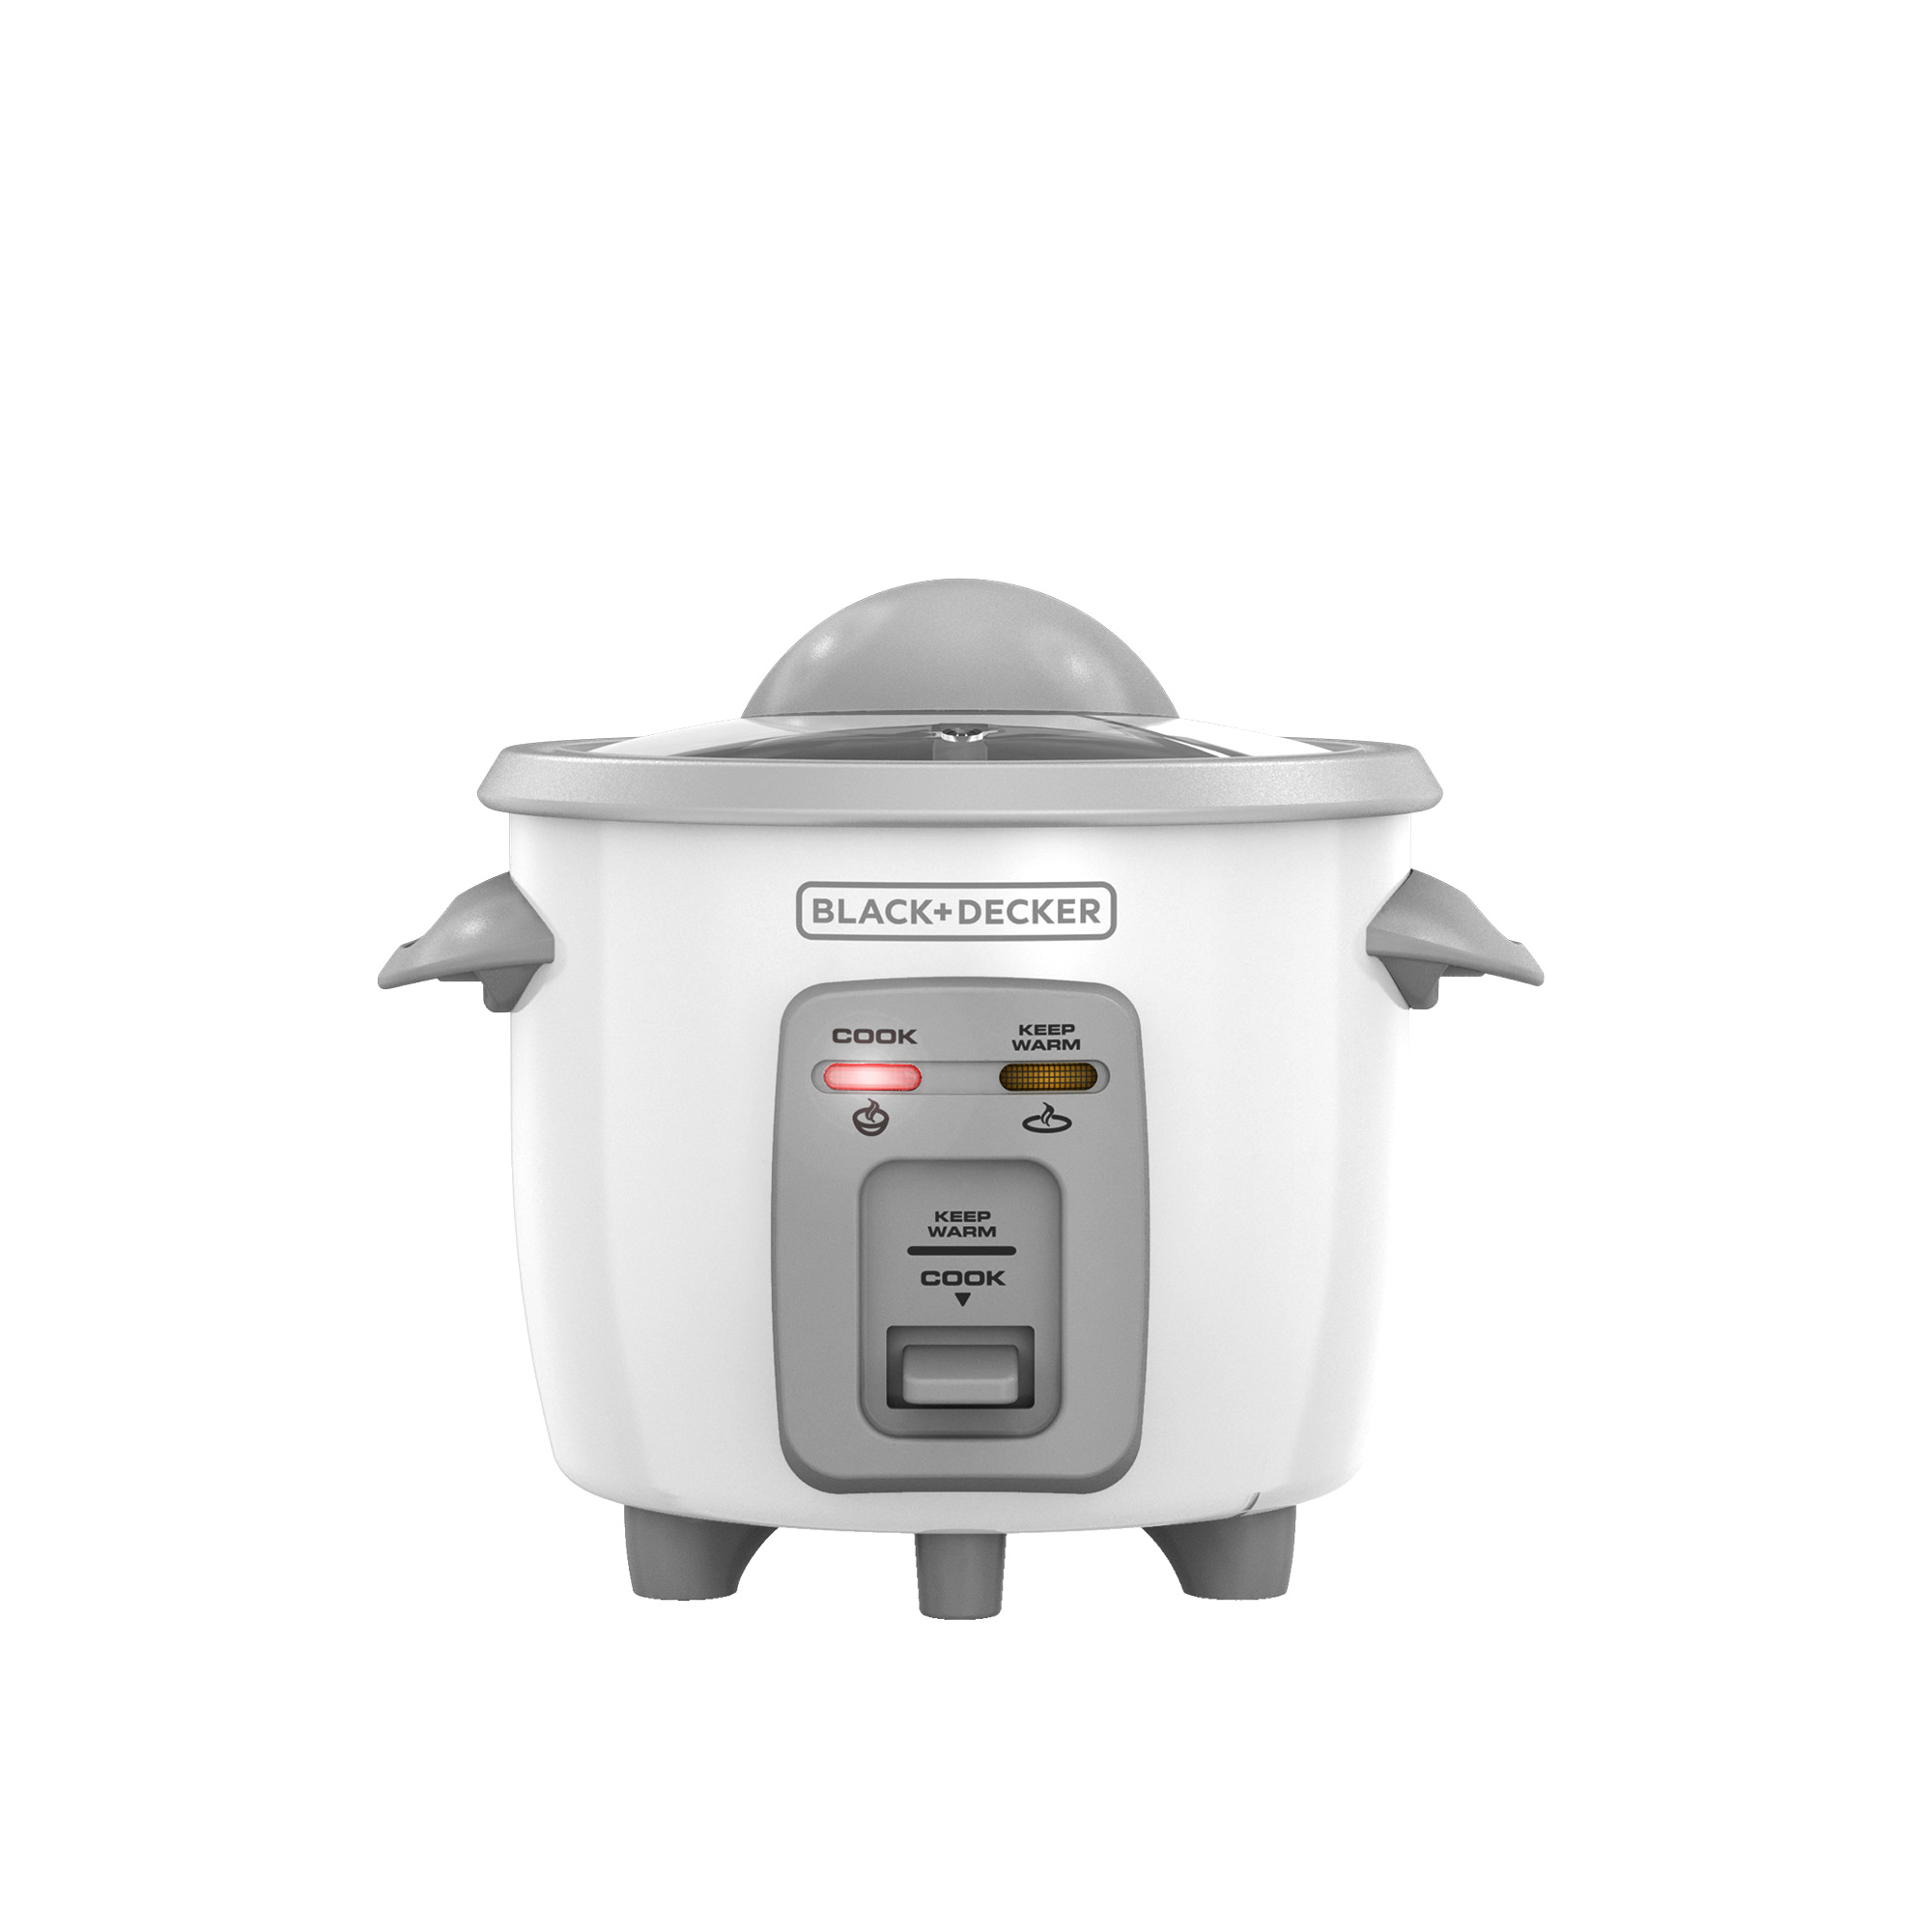 Black and Decker HS900 Flavor Steamer Plus Rice and Vegetable Cooker